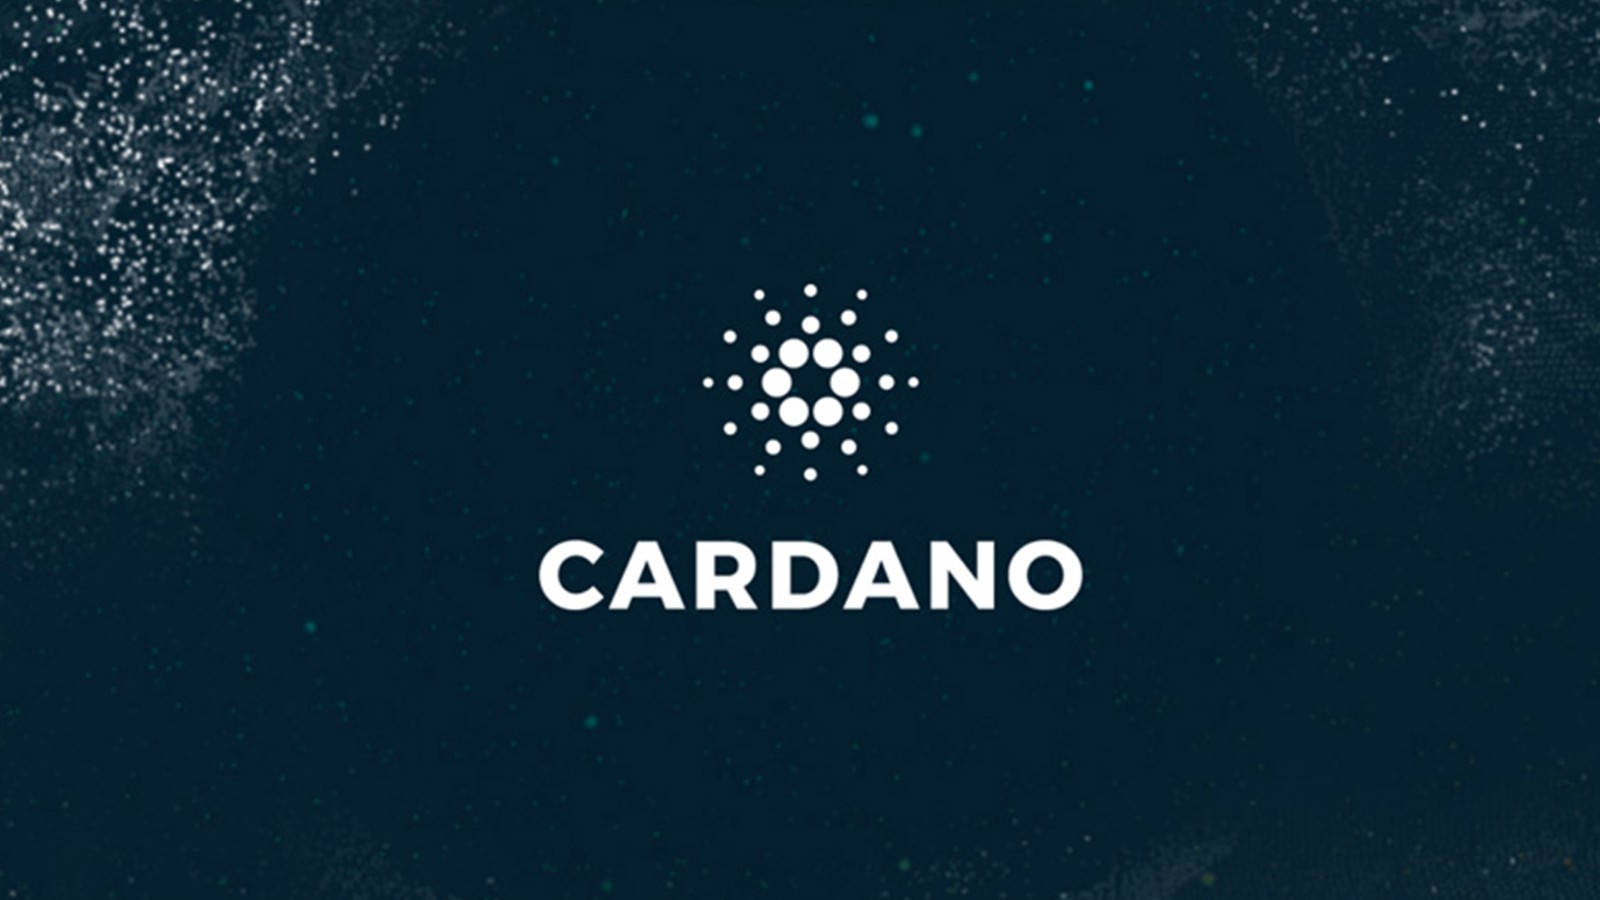 Cardano Investment: Risks to Consider